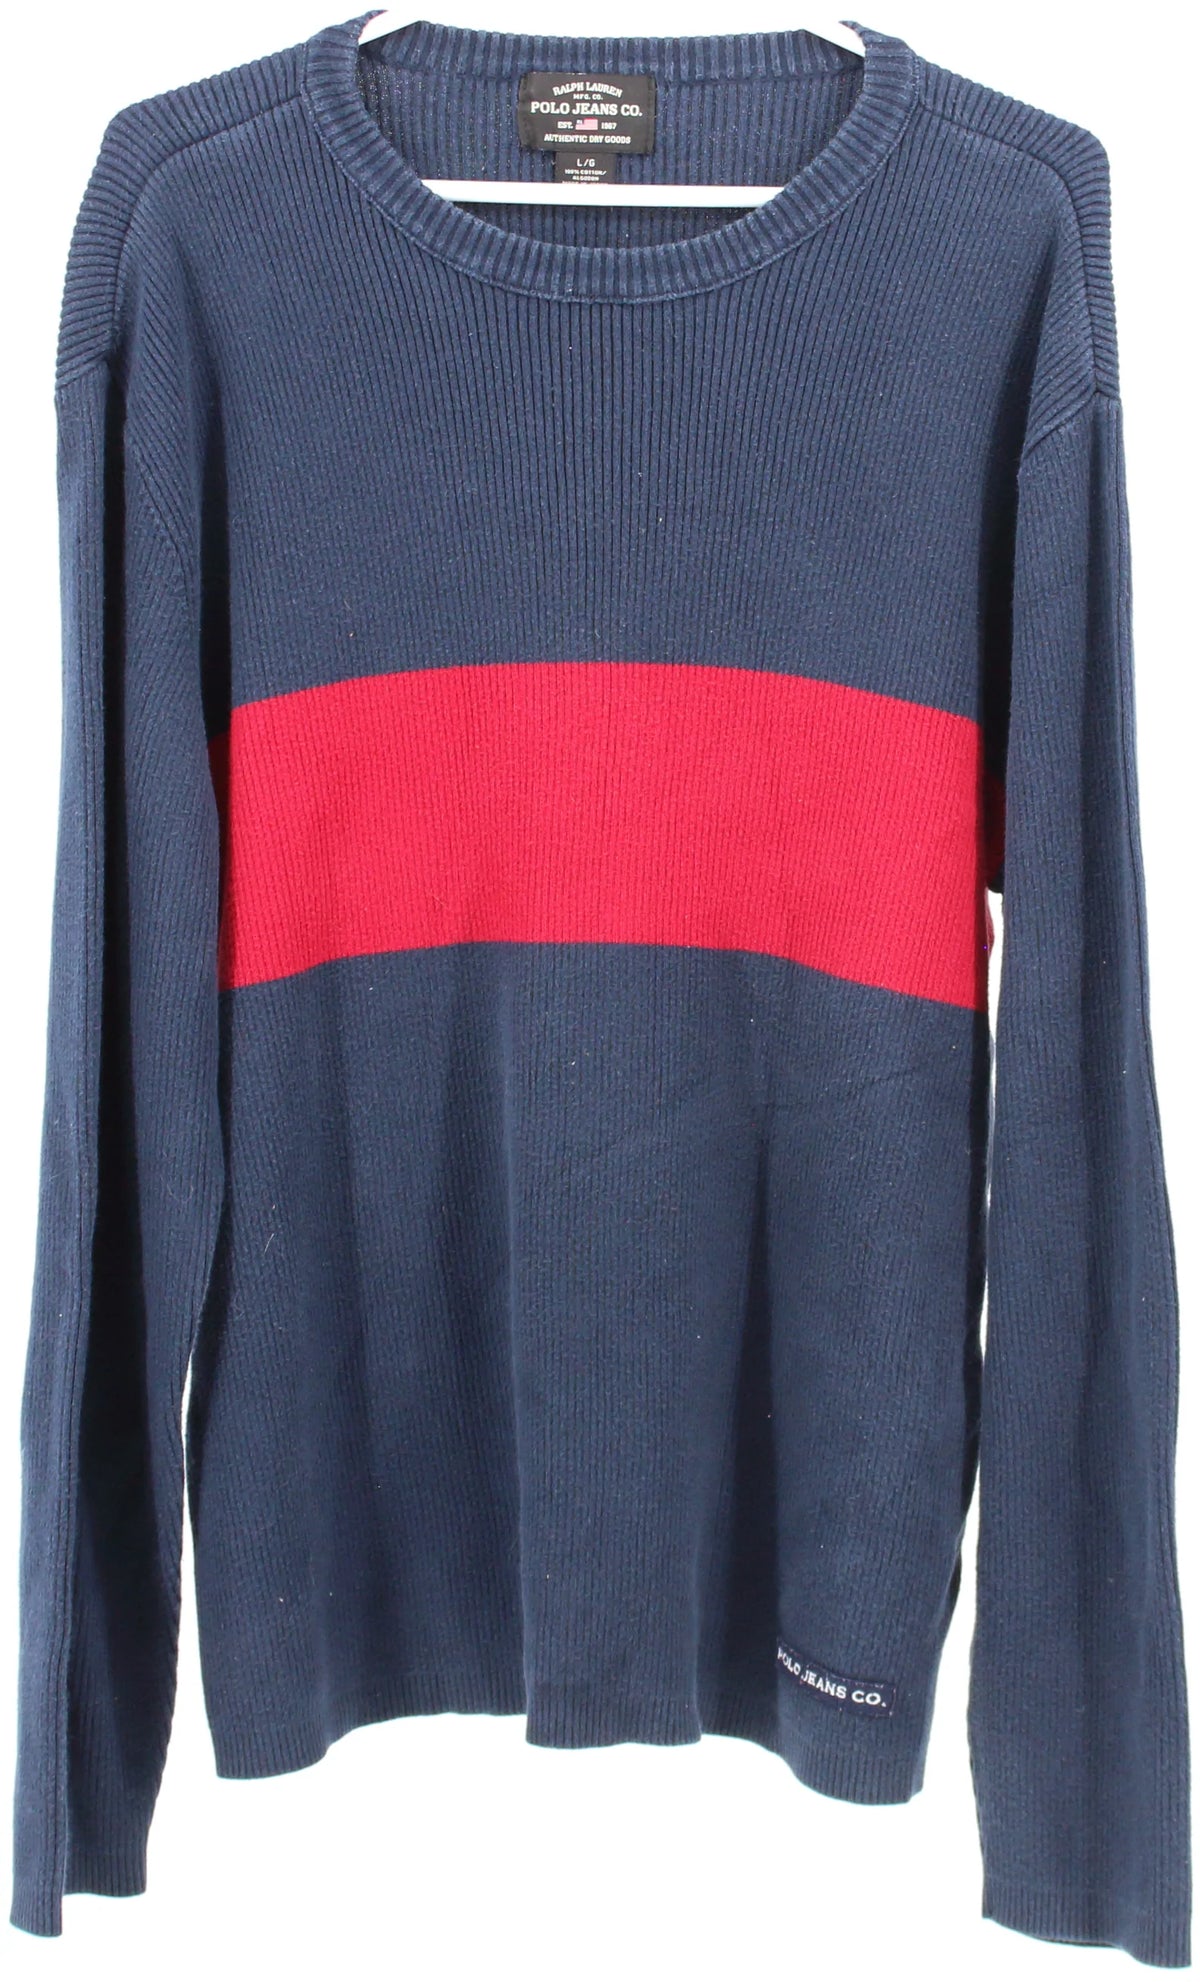 Ralph Lauren Polo Jeans Co. Navy Blue and Red Sweater